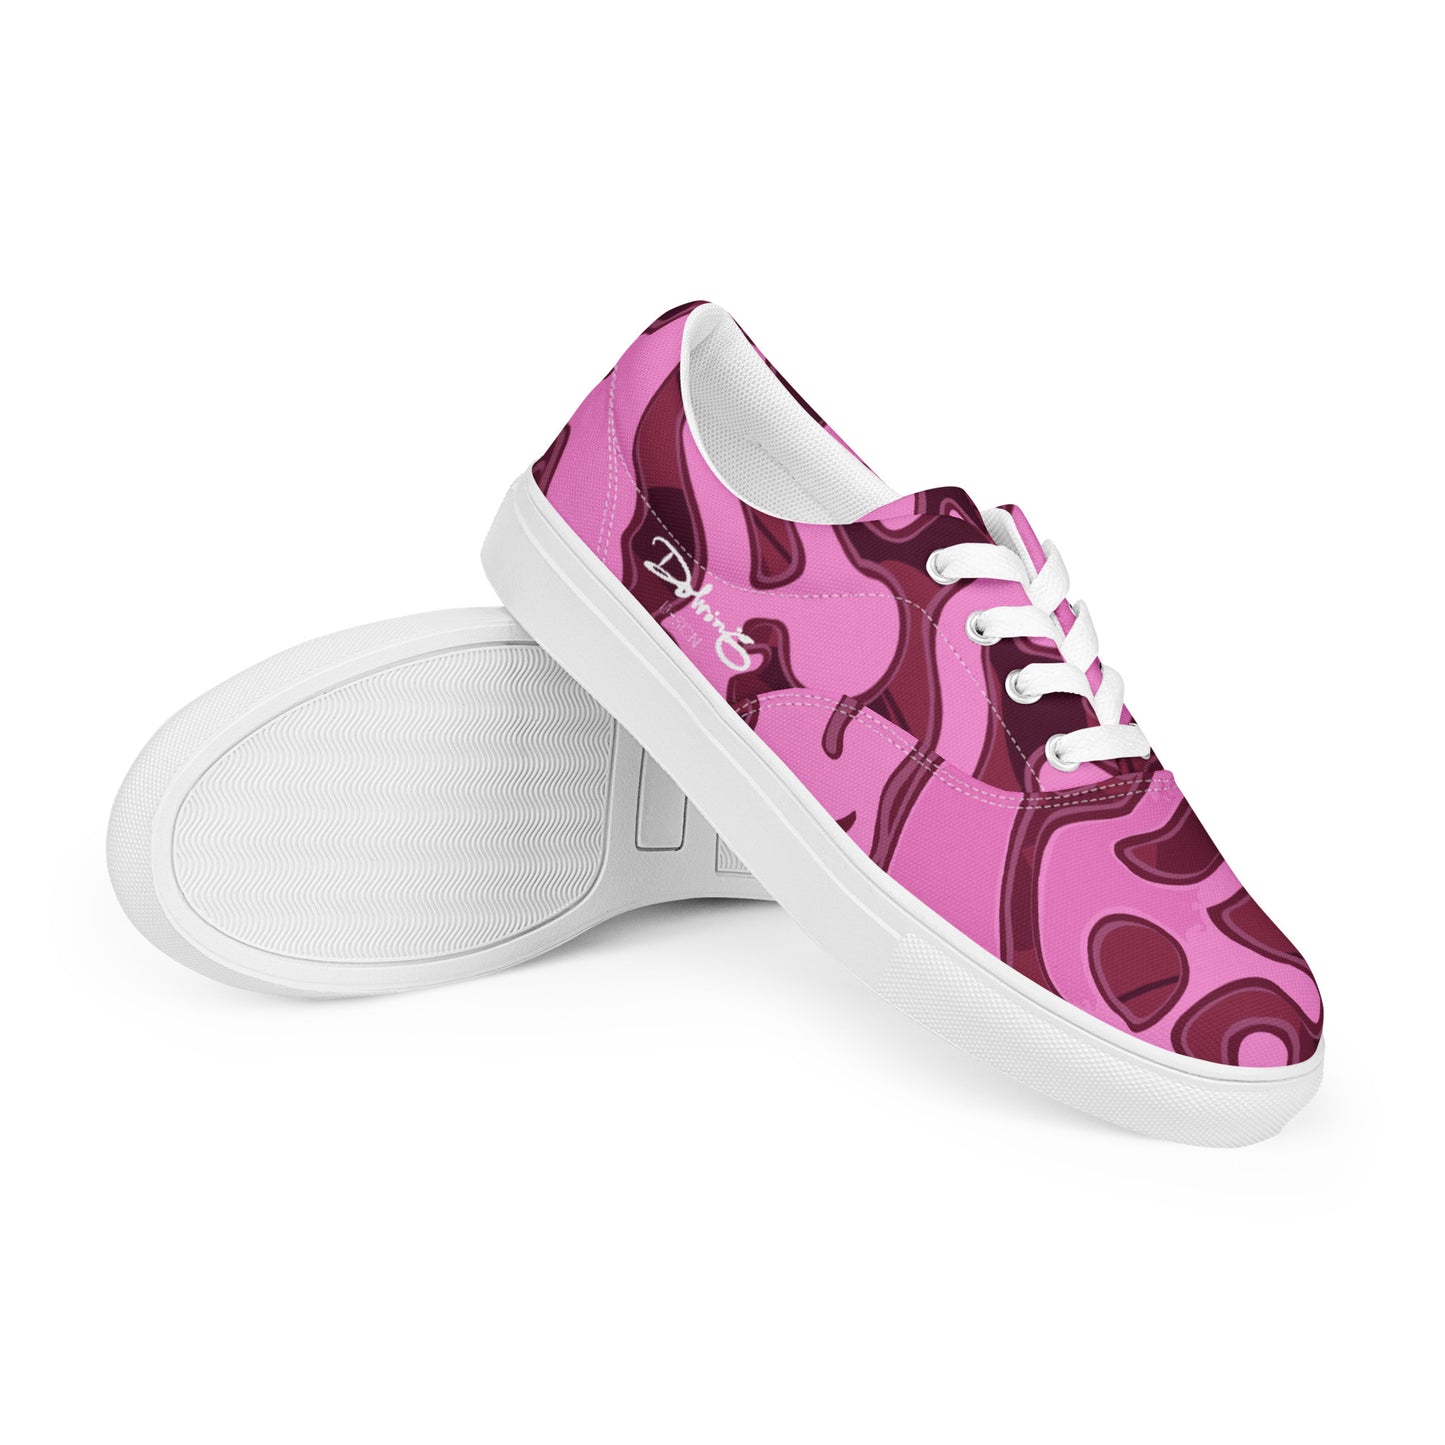 GRAPELY by DOLVING - Women’s lace-up canvas shoes